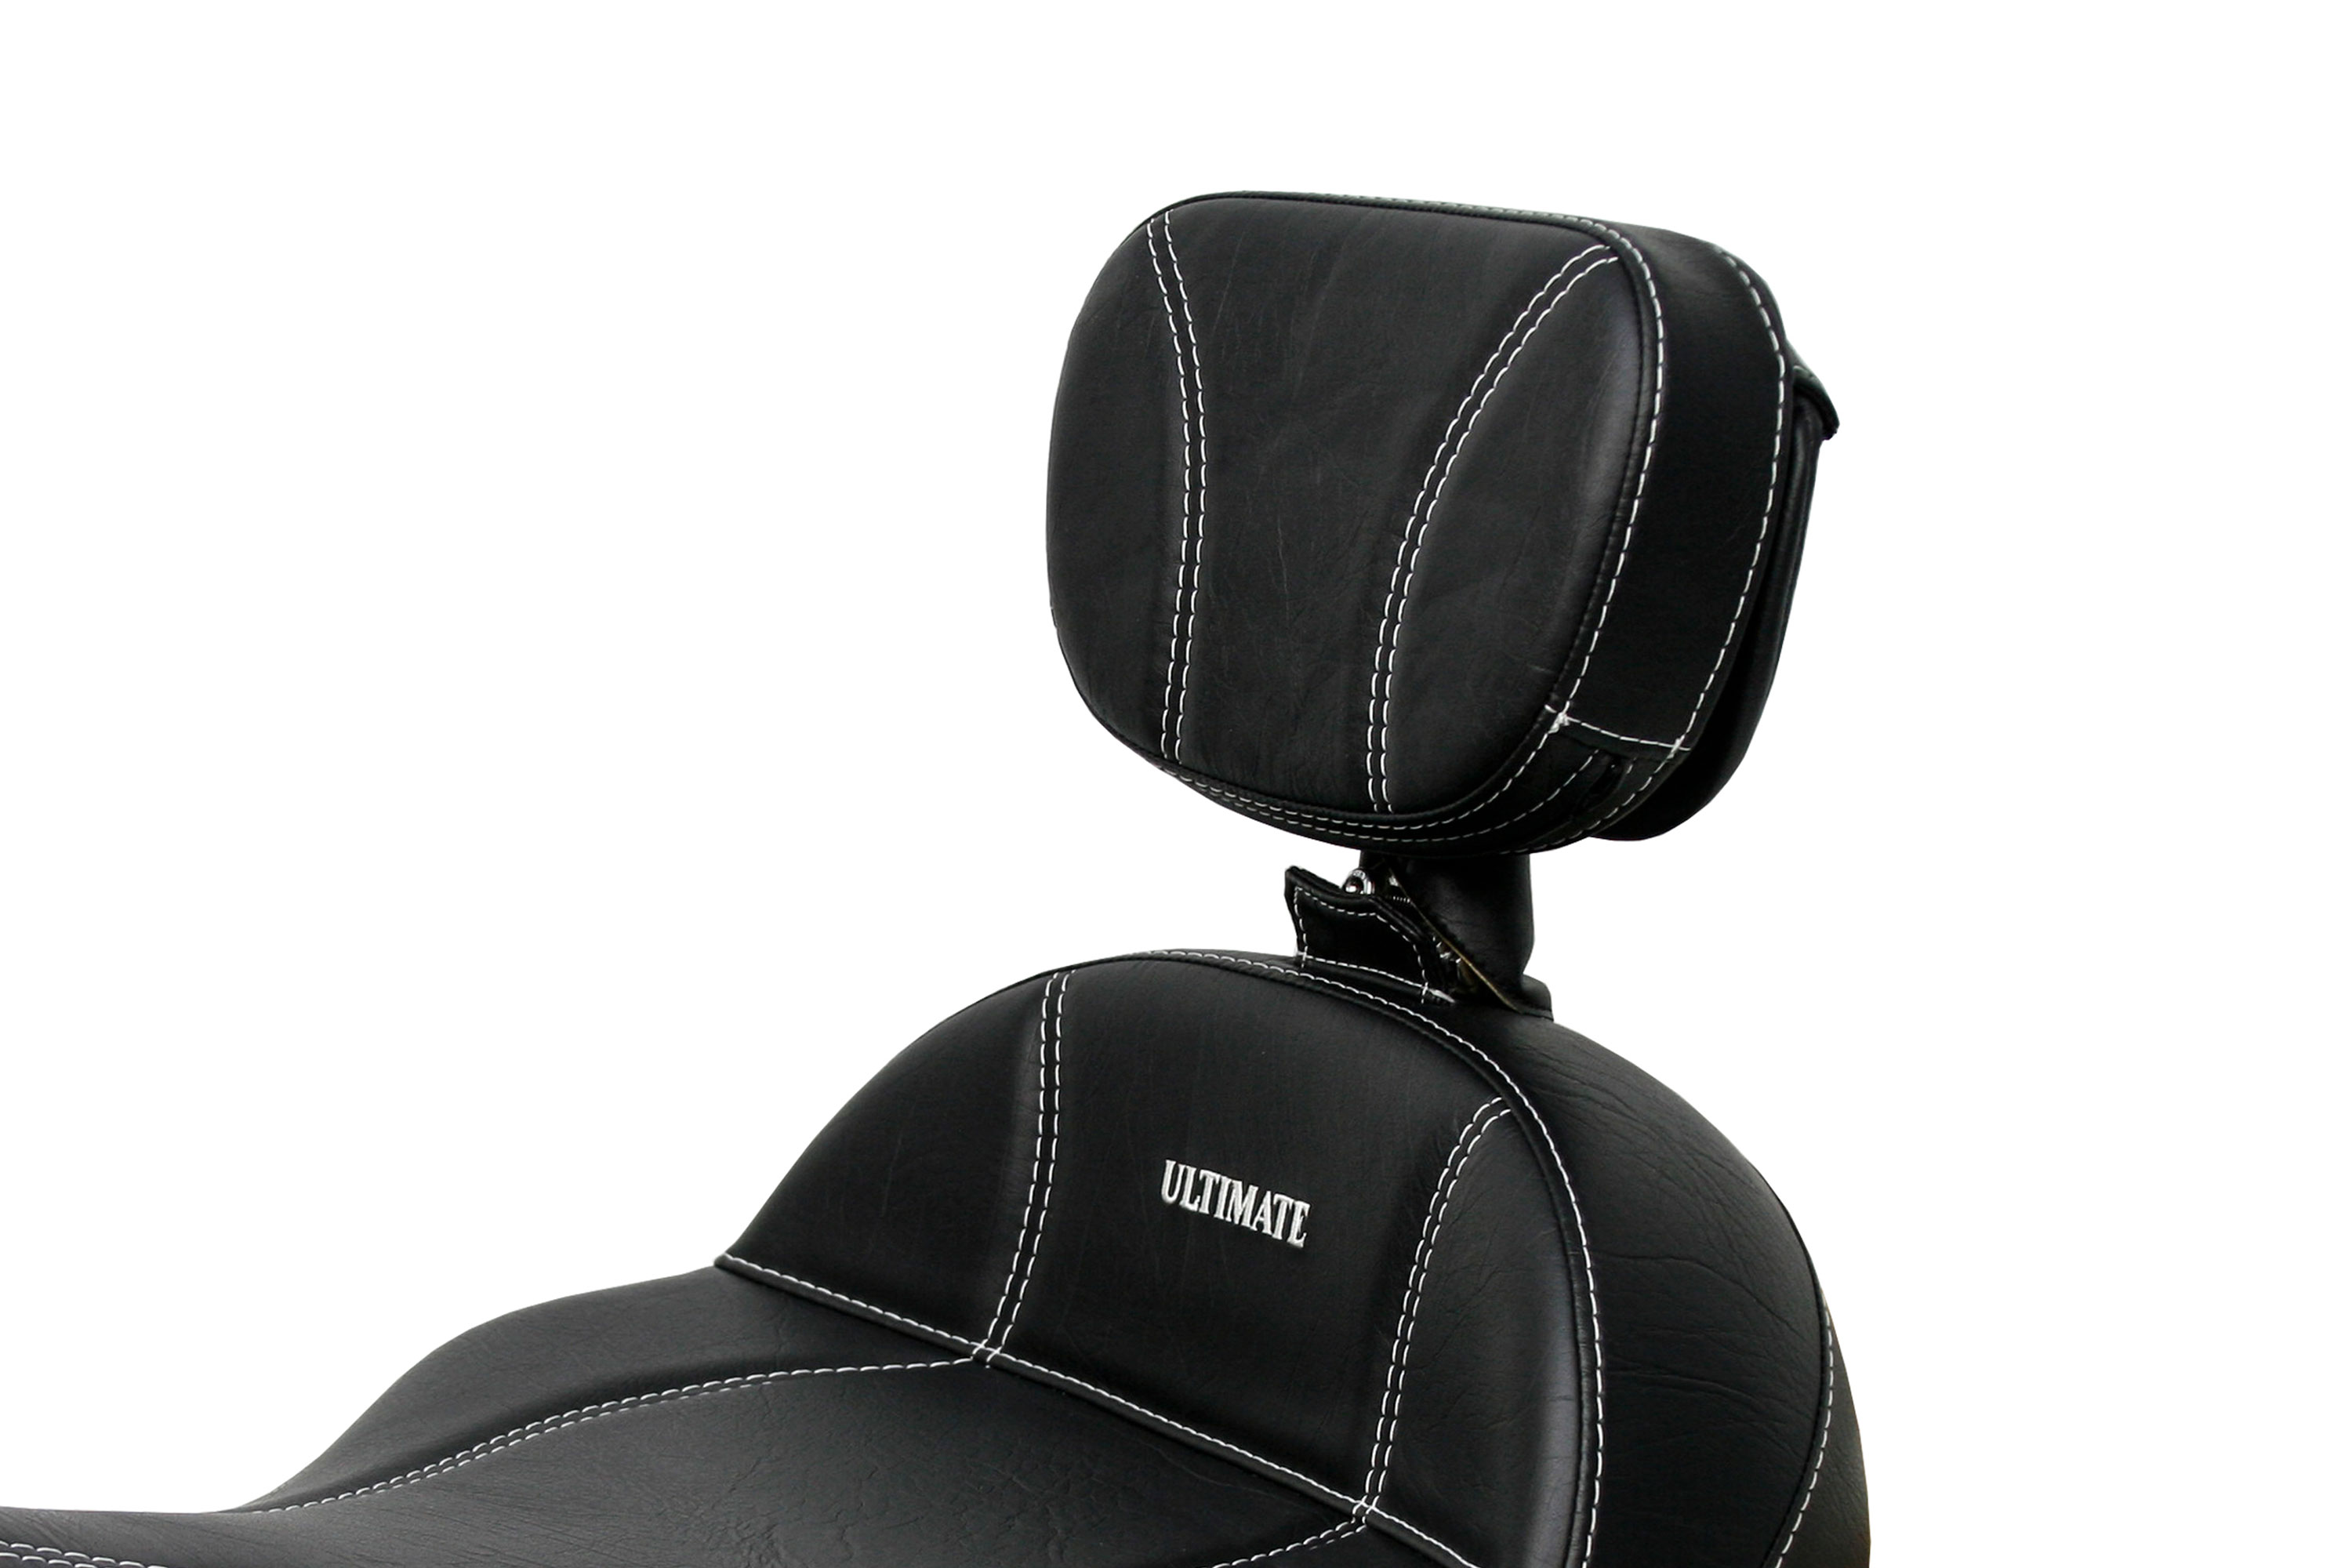 Chief / Chieftain / Springfield Driver Backrest (2014-2018)